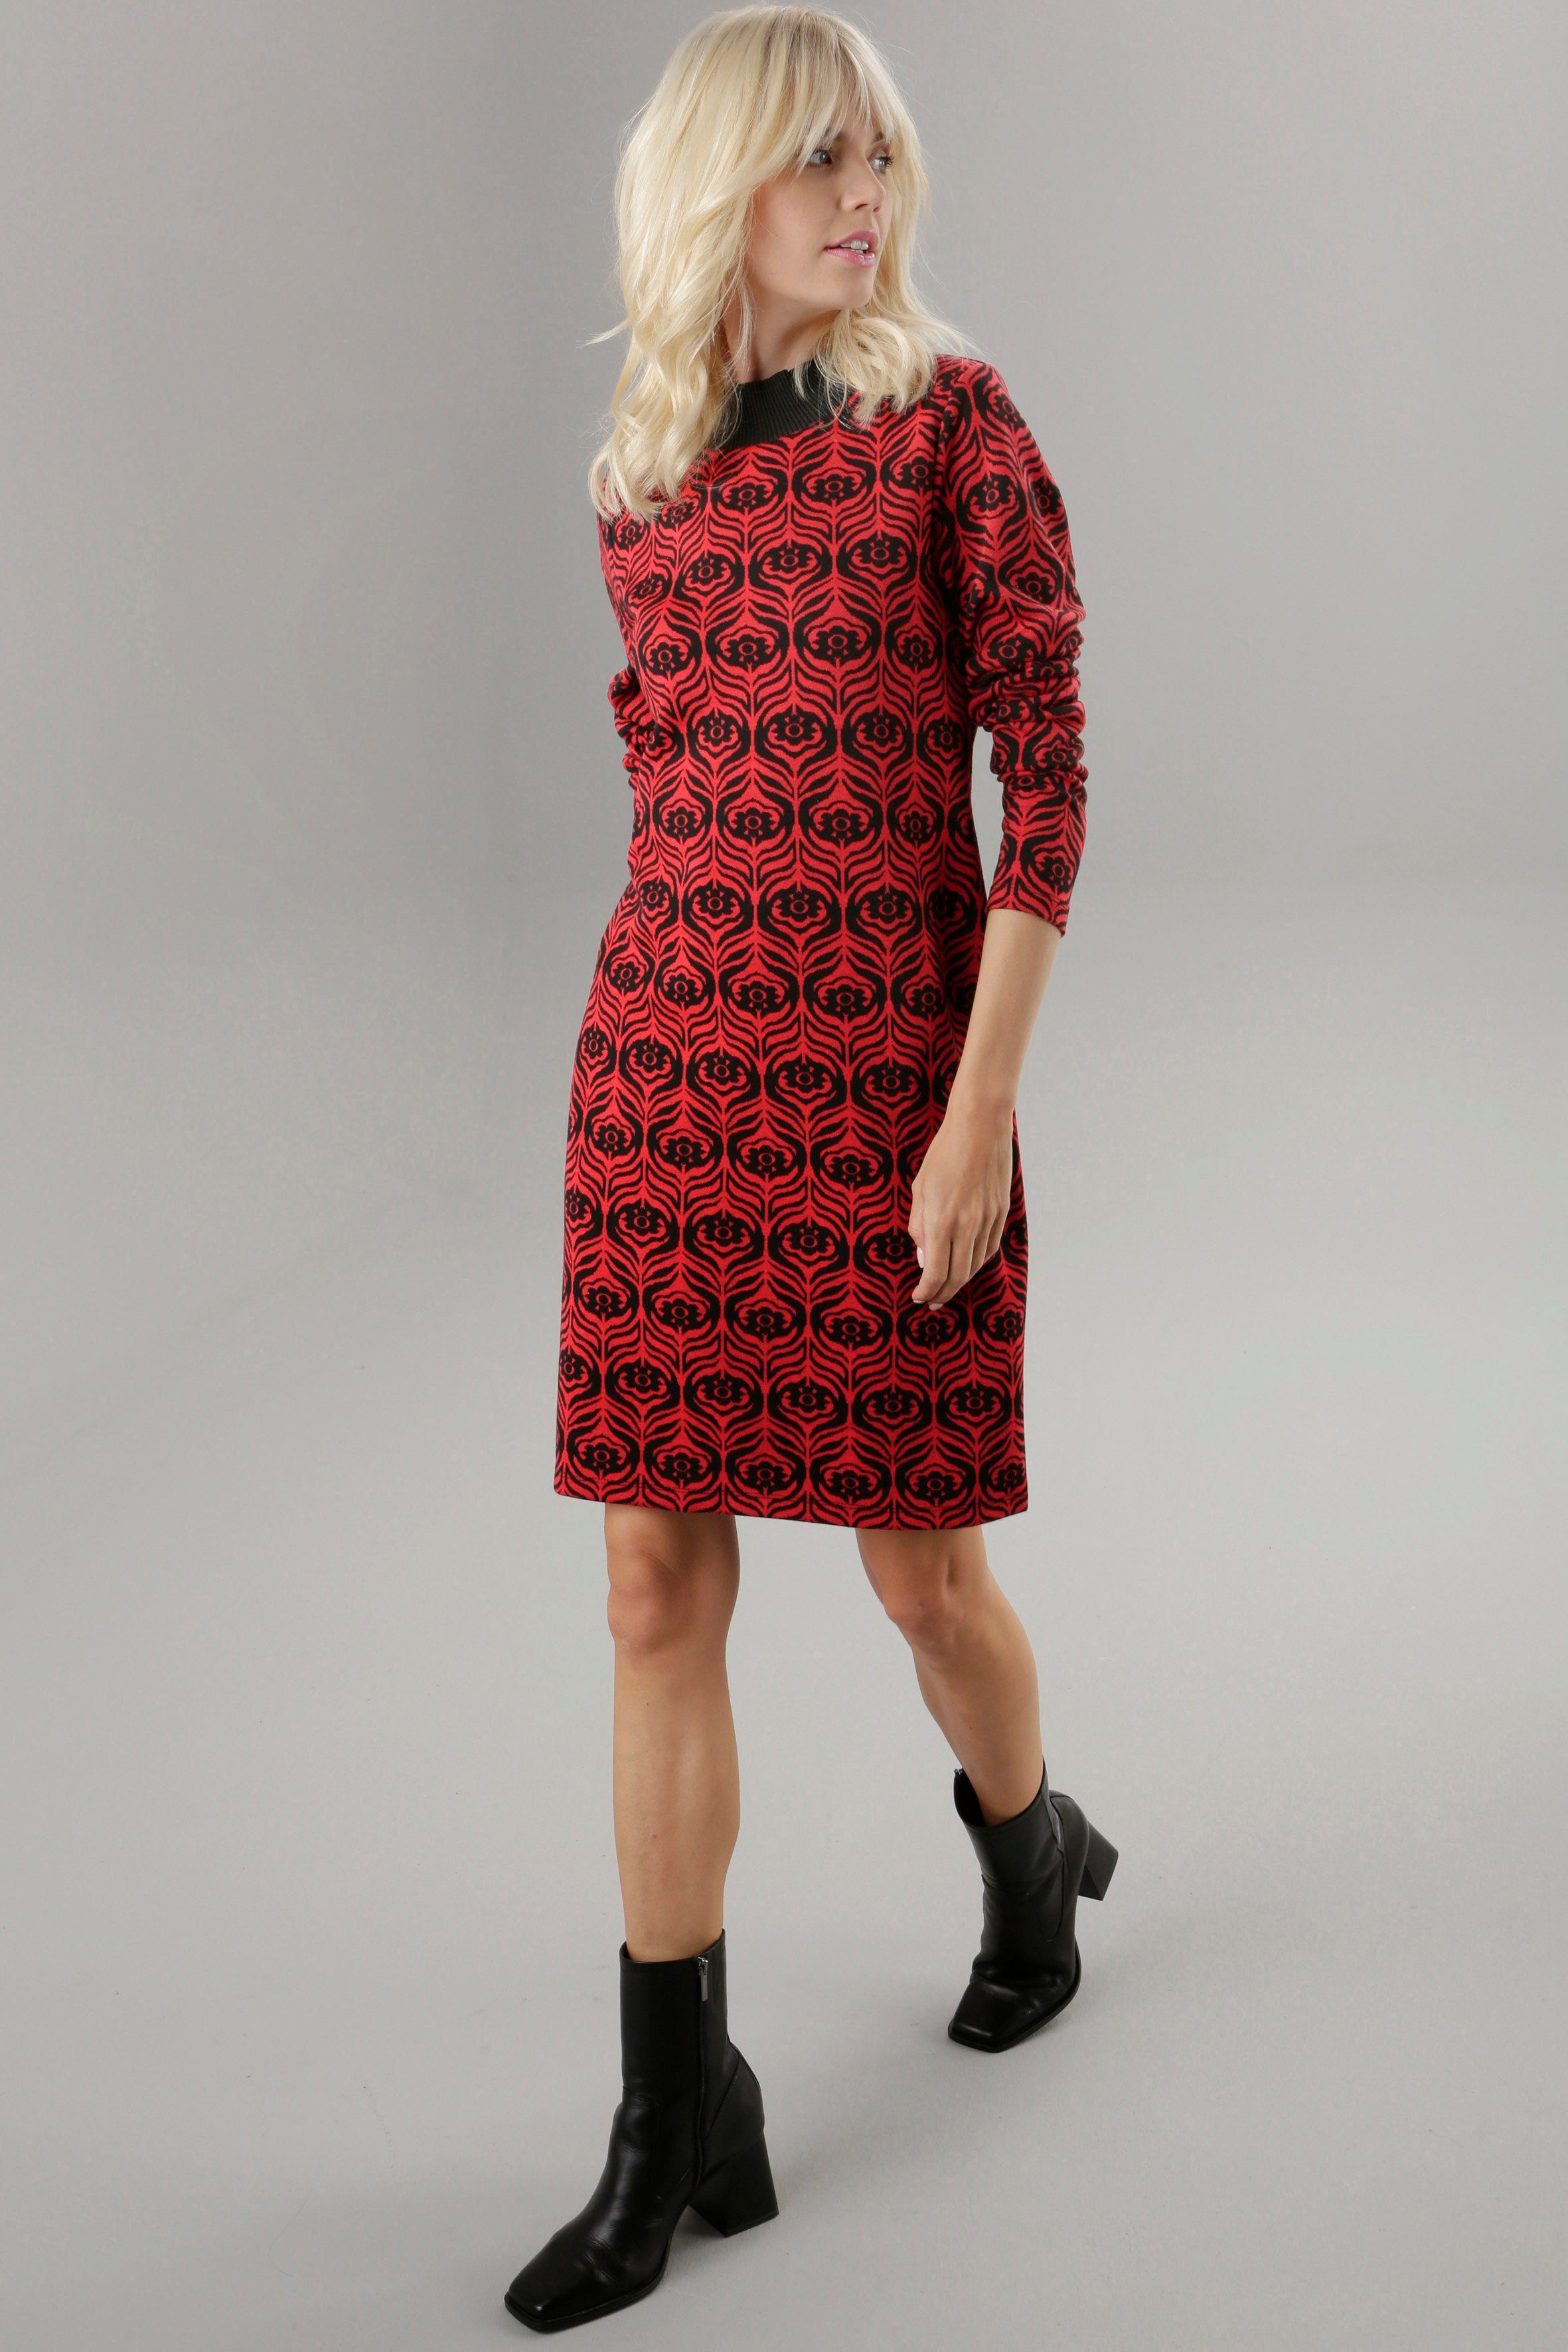 mit Jerseykleid SELECTED Retro-Muster Aniston